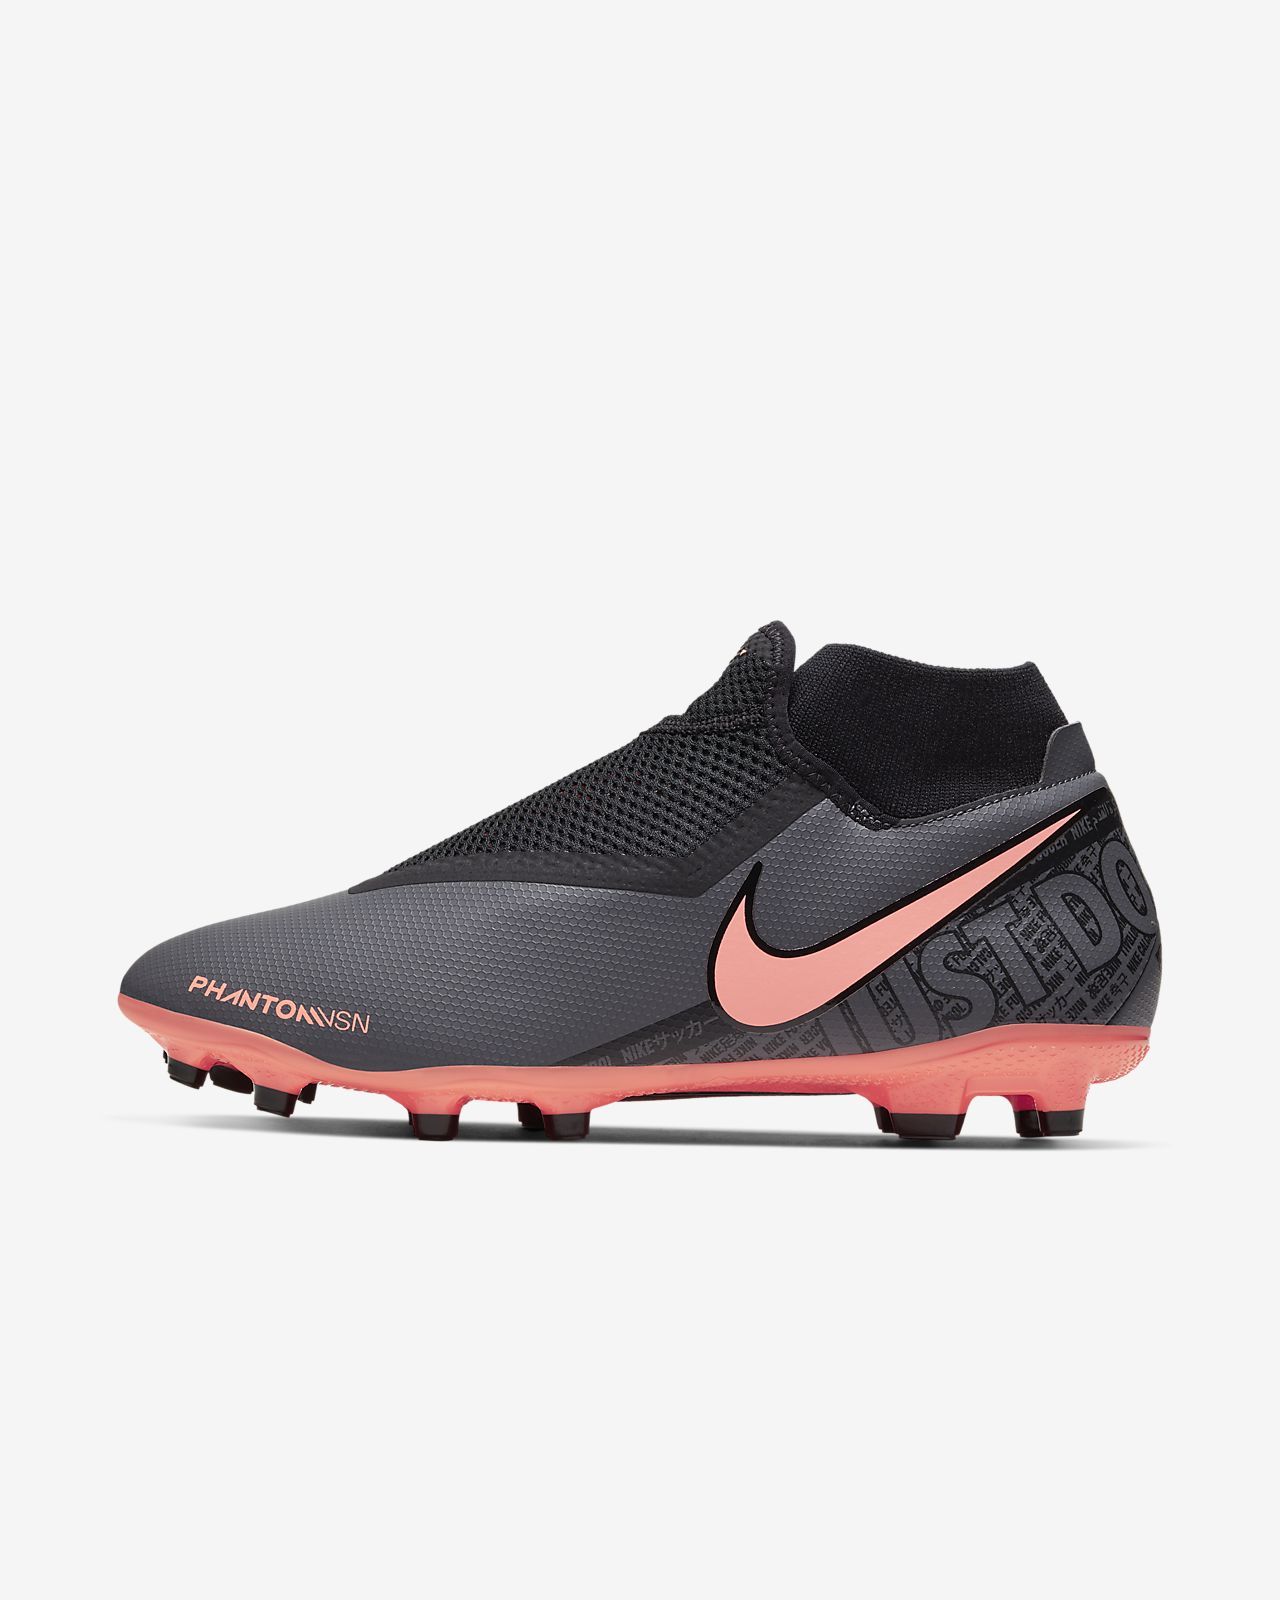 Nike Phantom Vision Elite Cleats Buy and Sell on